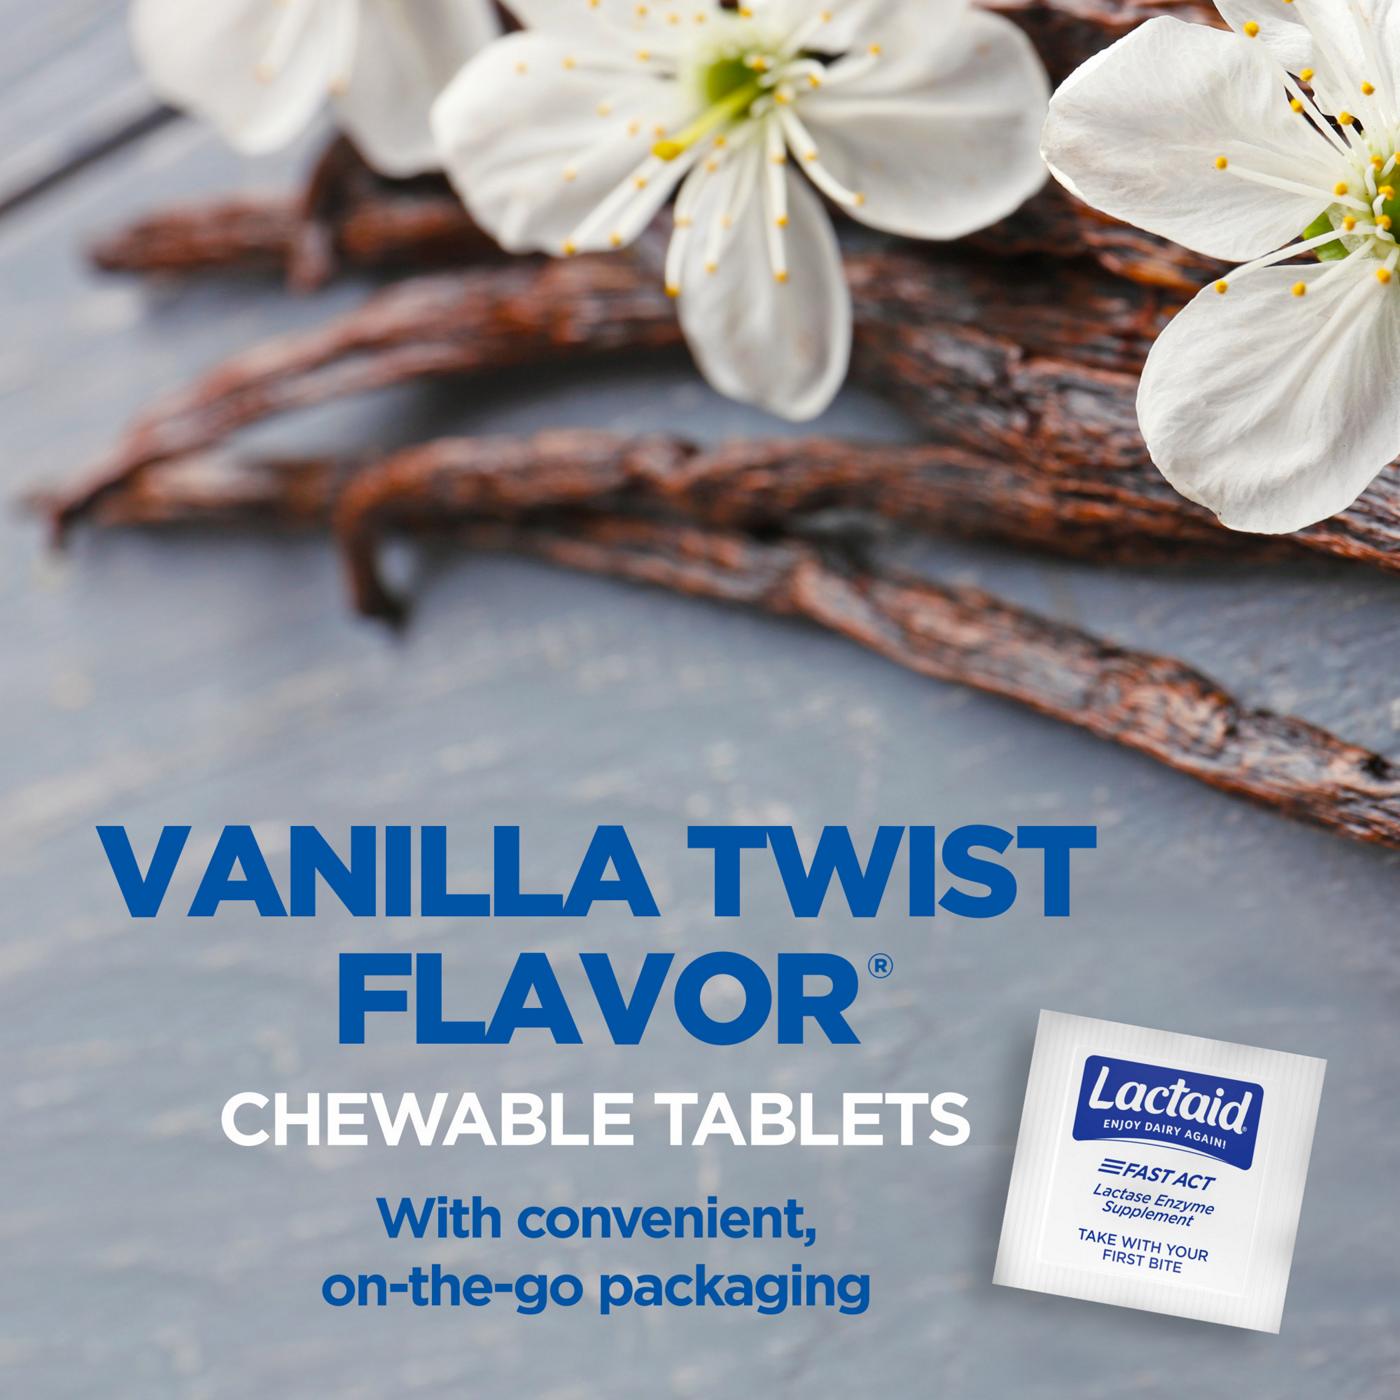 Lactaid Fast Act Chewables - Vanilla Twist; image 4 of 5